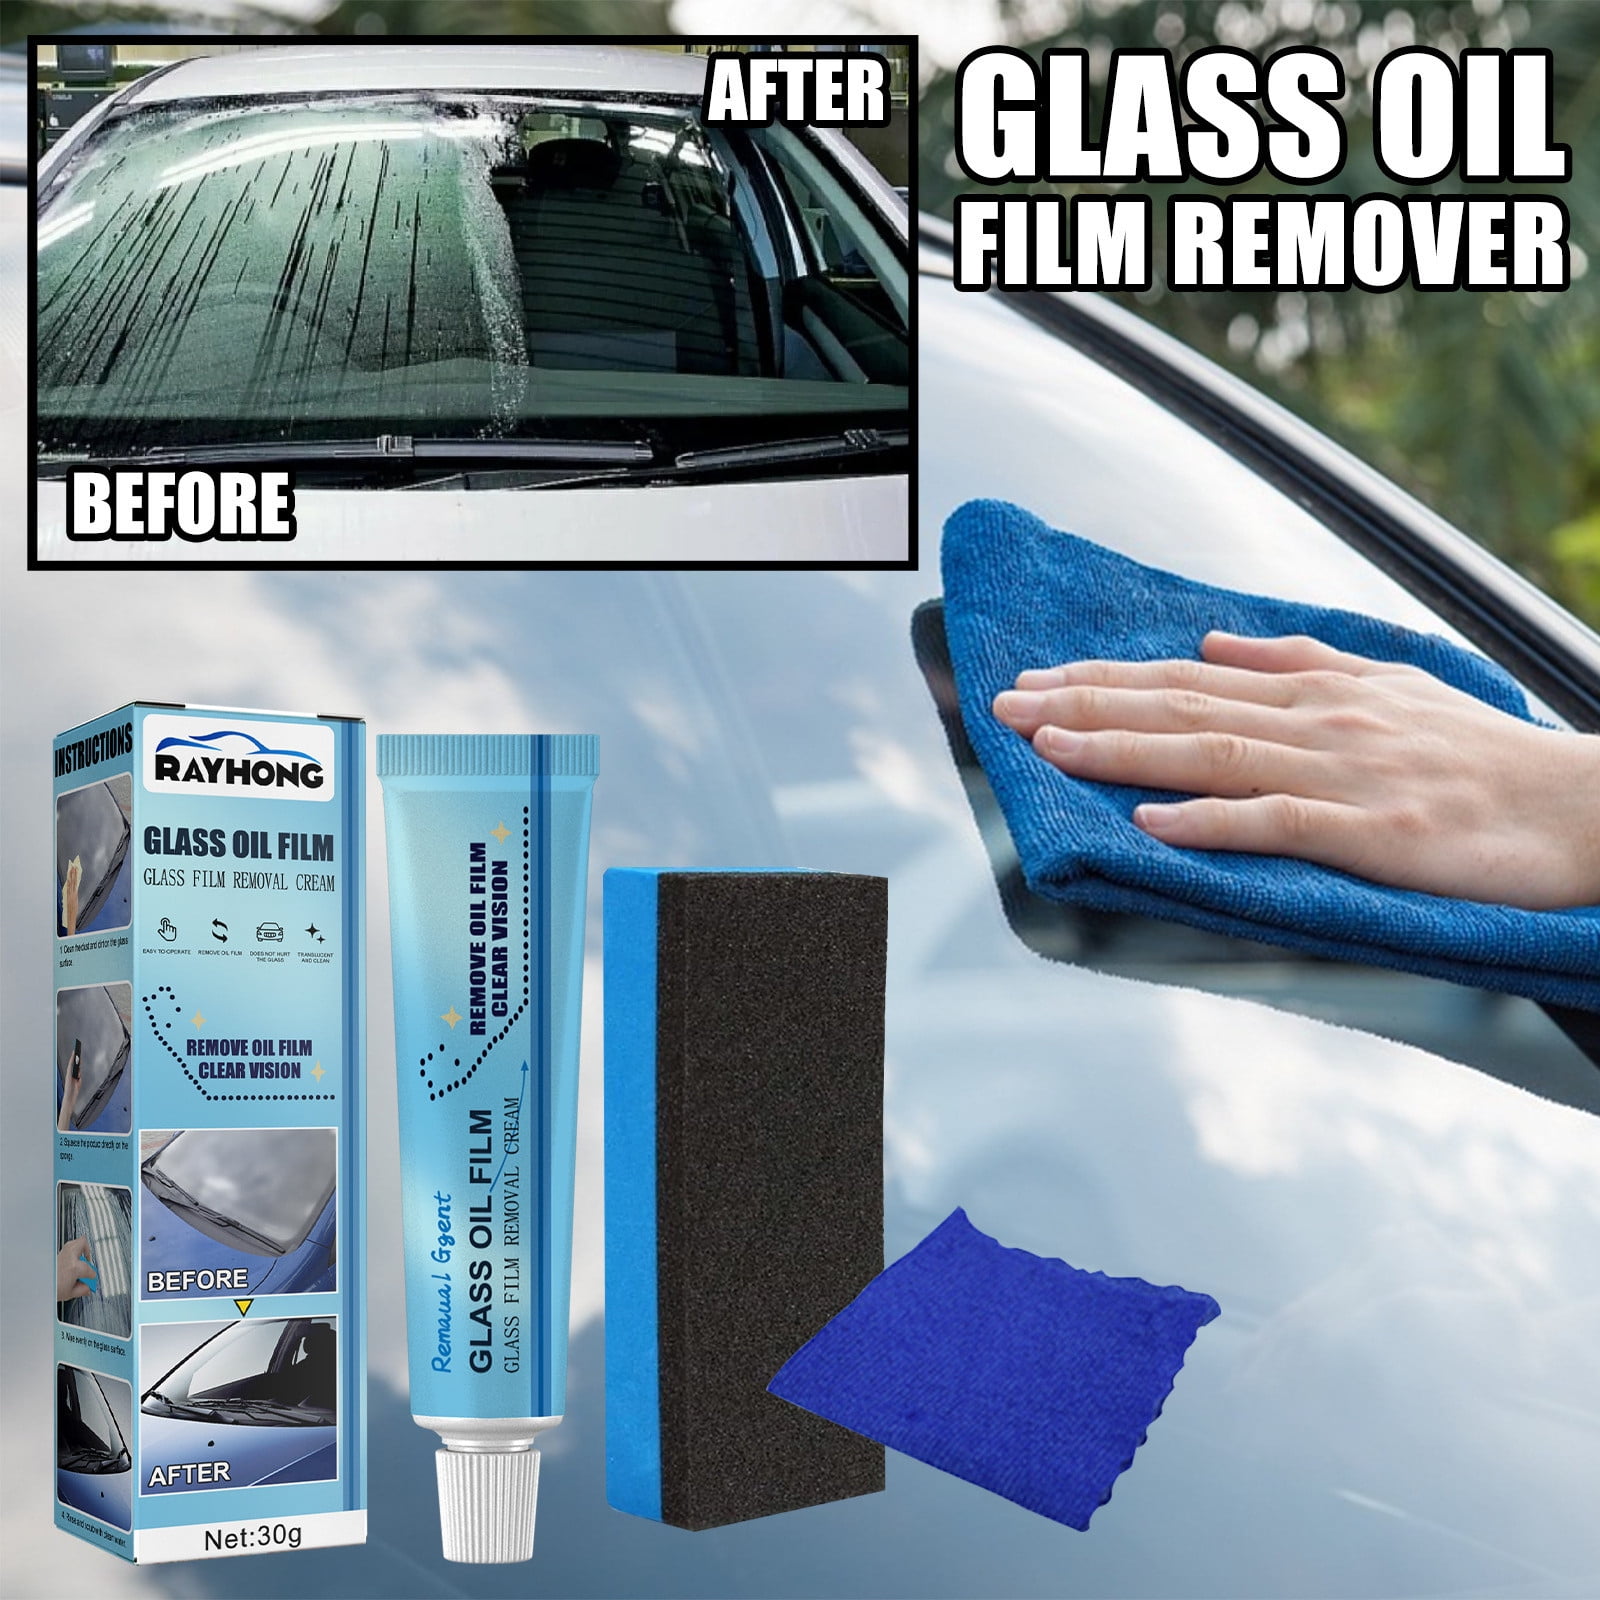 QISIWOLE Glass Oil Film Cleaner,Glass Oil Film Removing Paste,Glass Stripper  Water Spot Remover, Car Windshield Oil Film Cleaner,Windshield Cleaner Car  Paint Oil Film Remover 